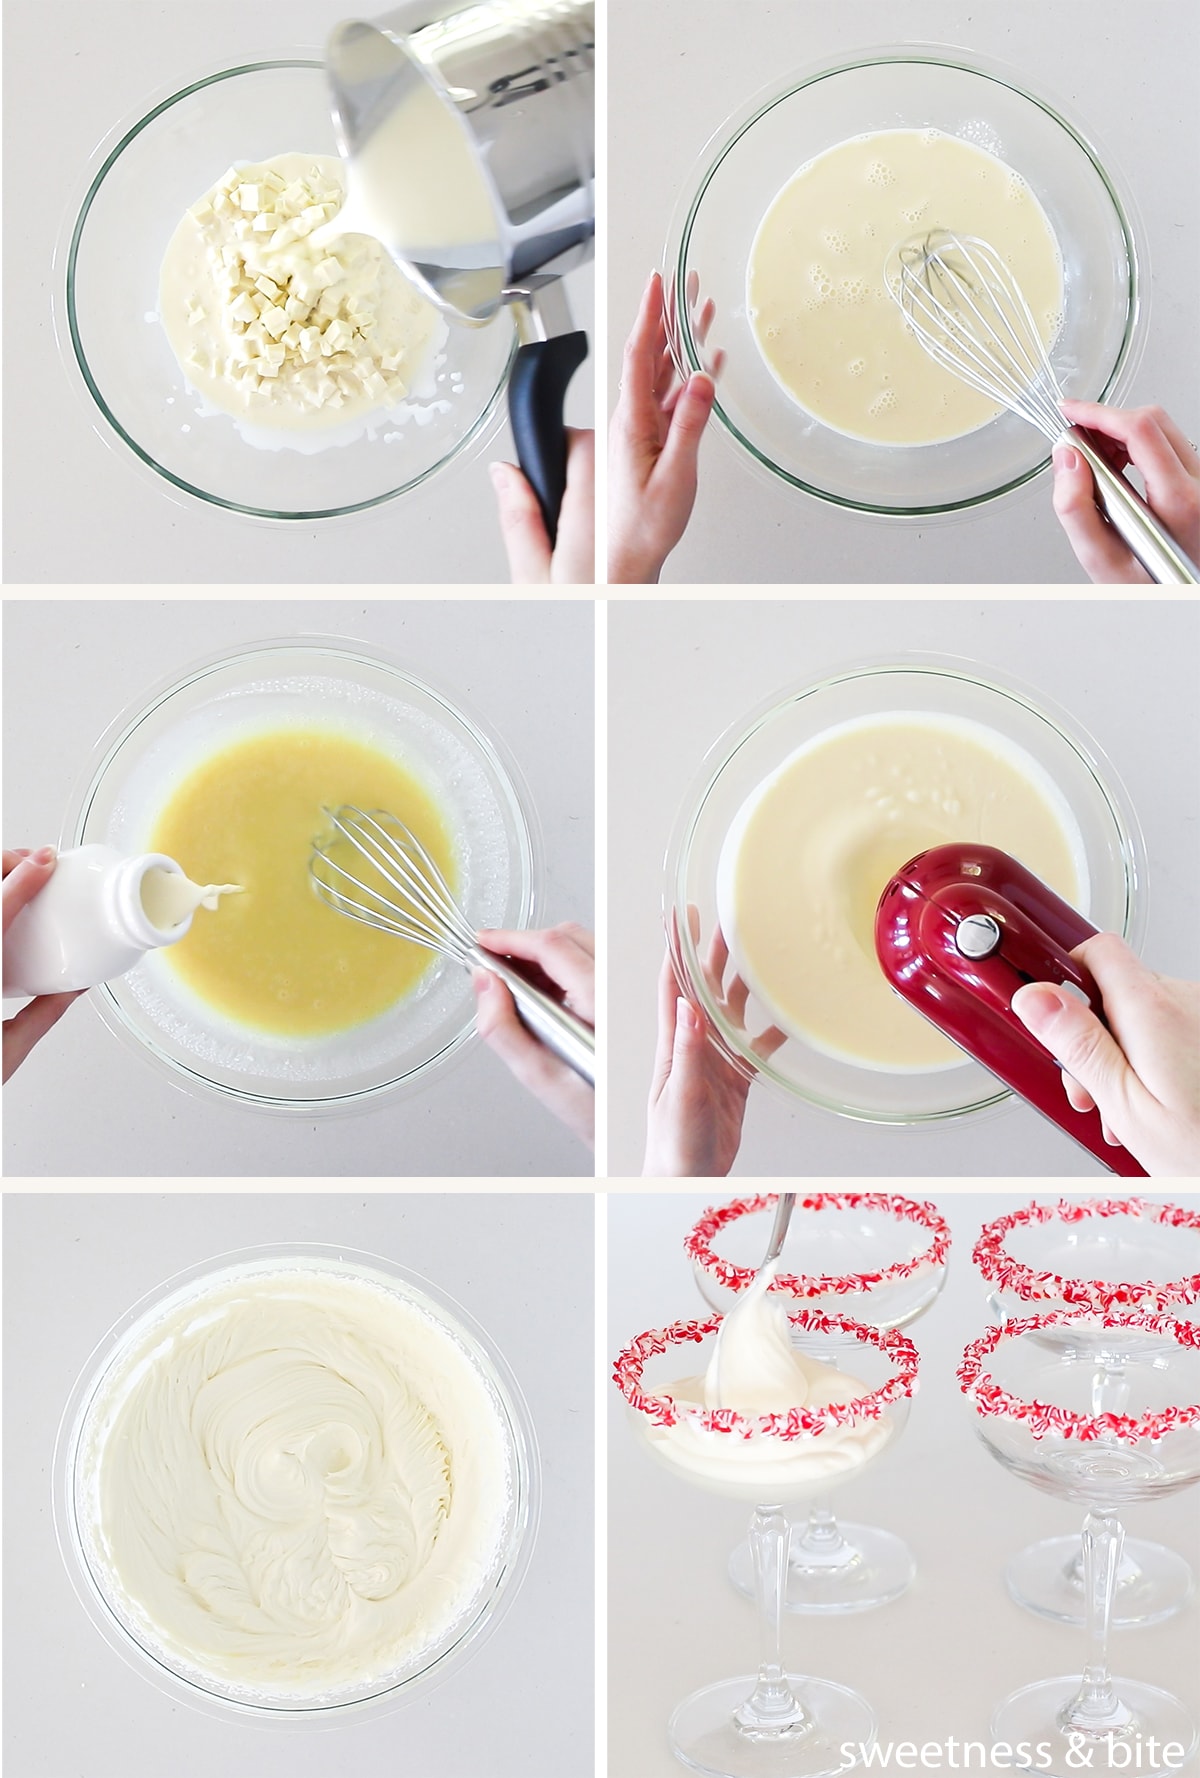 A collage of six images showing the steps in the recipe. Melting the chocolate with the cream, whisking the mixture together, adding more cream, whipping the mousse and spooning into serving glasses.